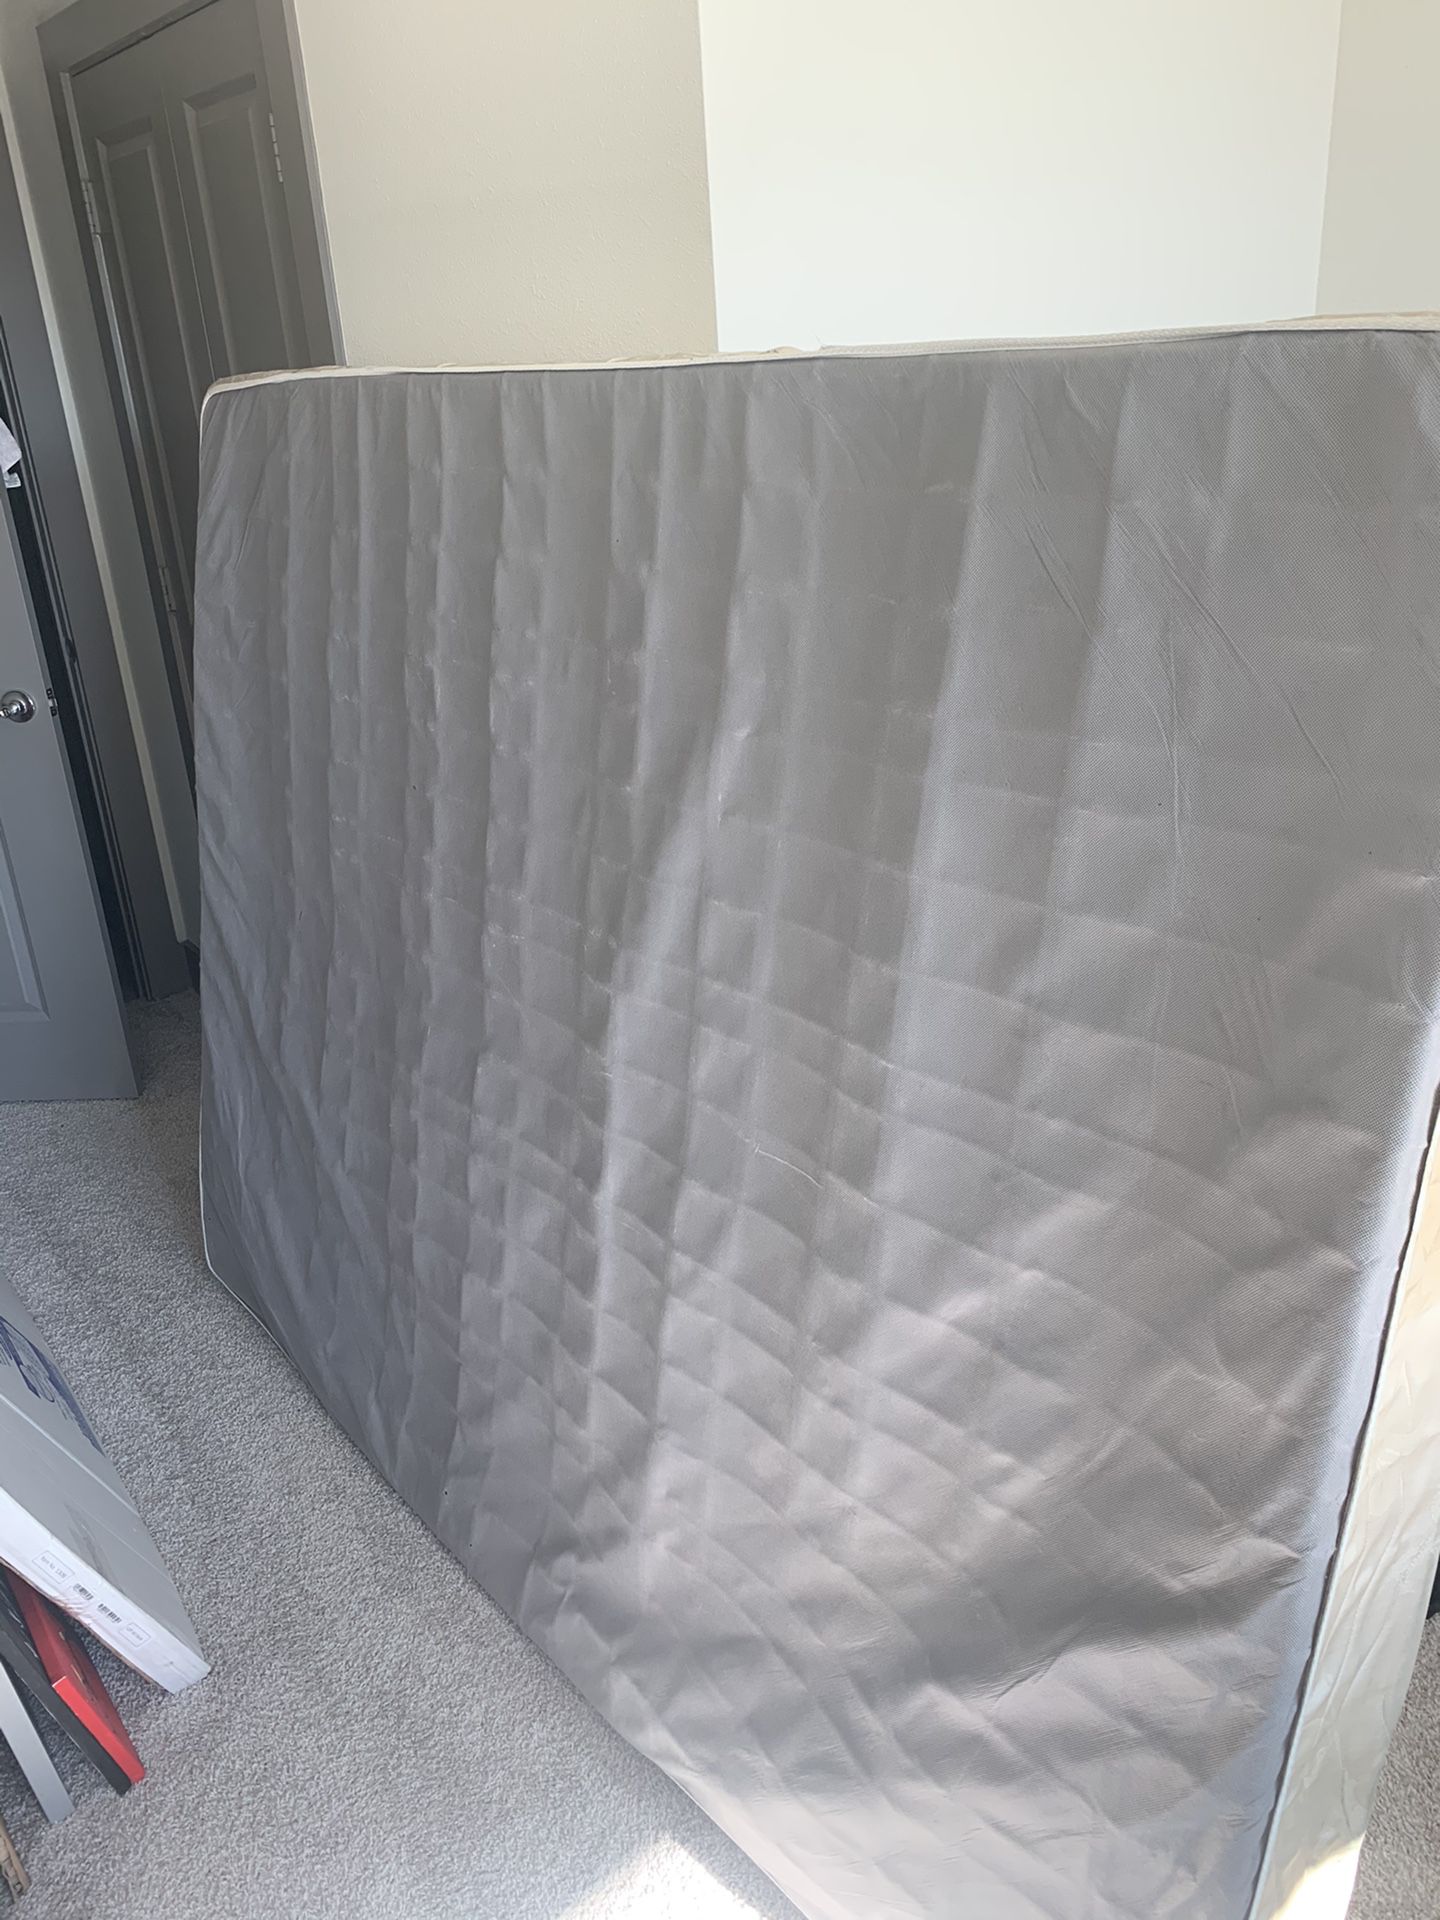 Free Queen box spring - got a bed set and frame not needed